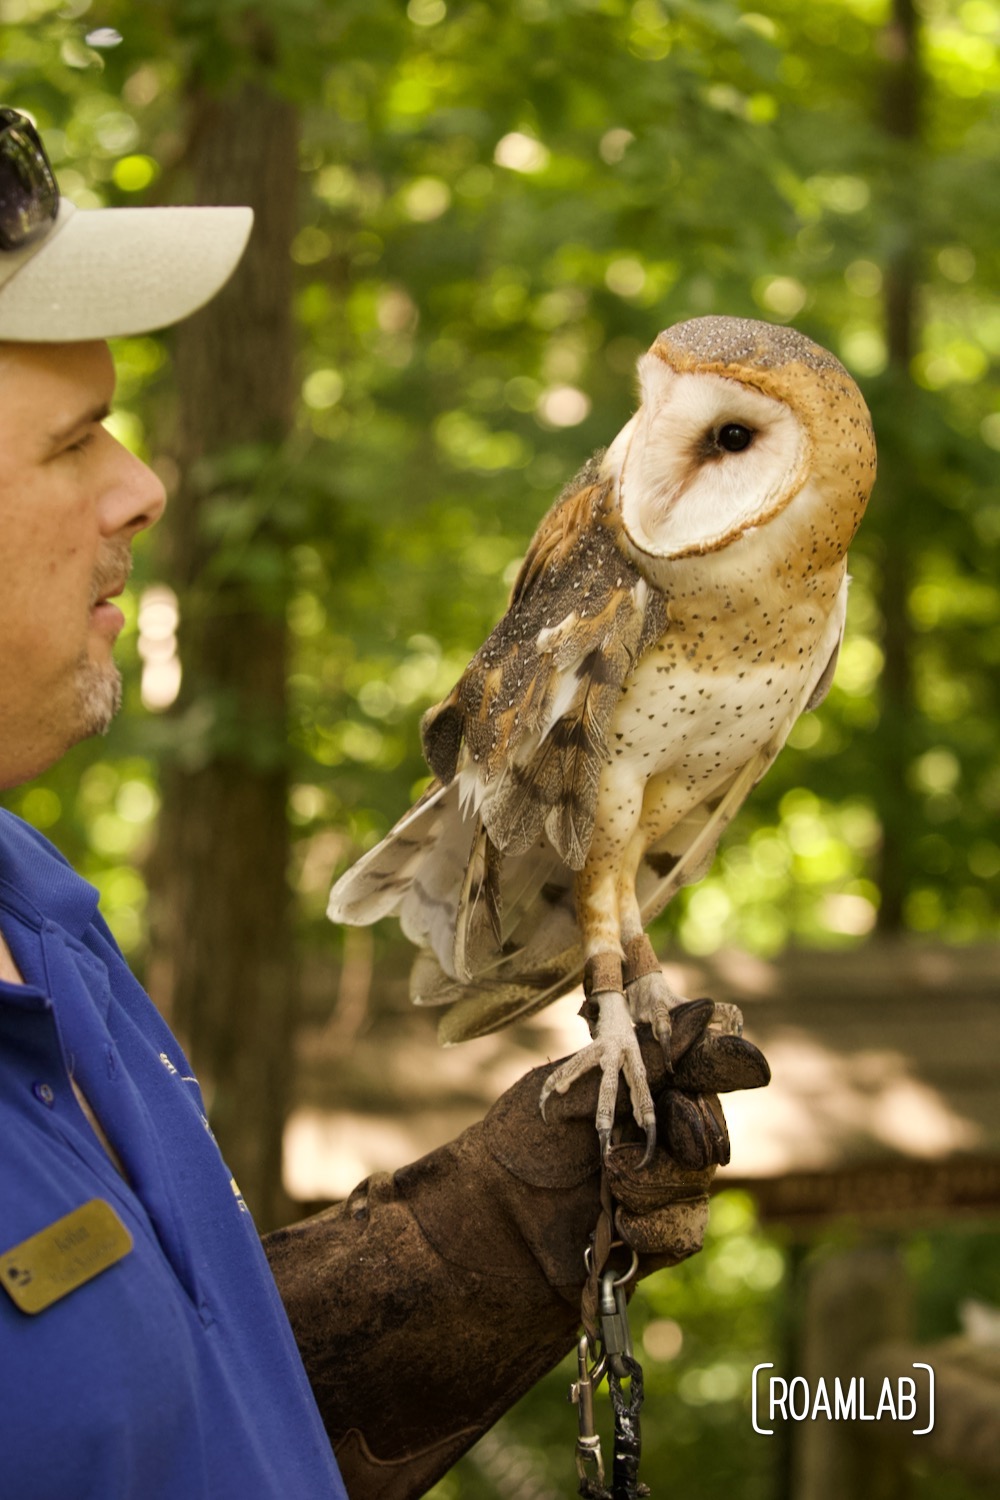 Woodlands Nature Station staff member introduces Ghost the Barn Owl on his gloved hand.